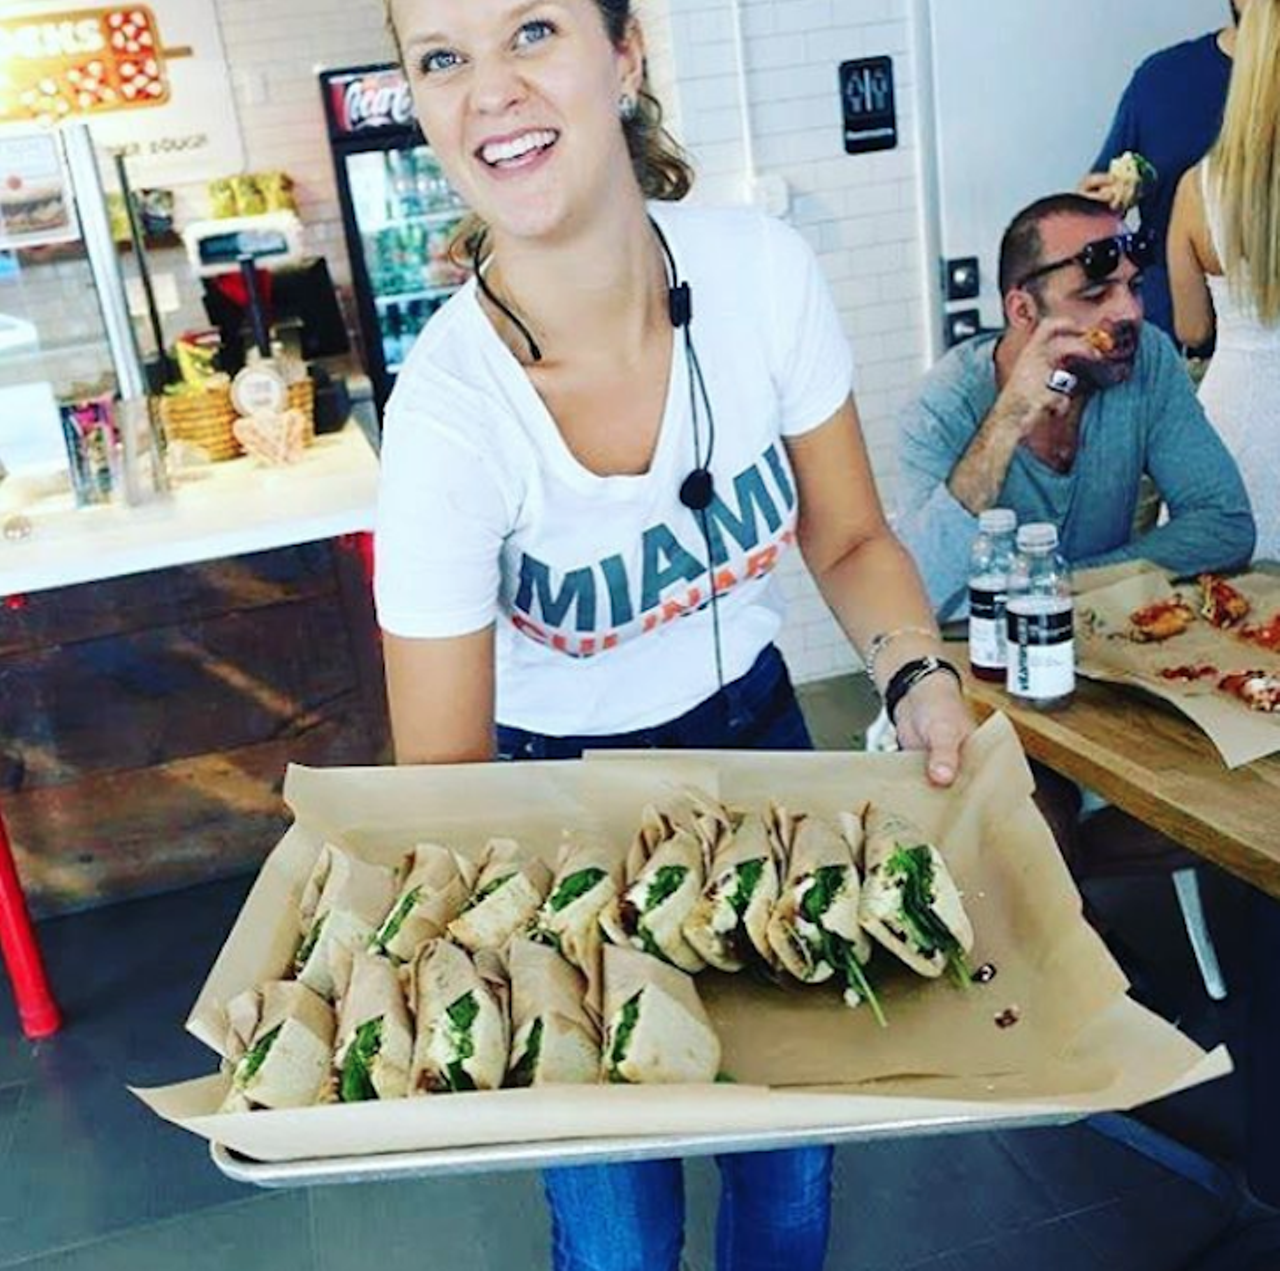 Littlle Havana Food Tour
1000 5th St., Miami Beach  | 786-942-8856
Take in Cuban culture through food on this 2 &frac12; hour tour that will let you feast on picadillo empanadas, sip mojitos, and indulge in guava pastries as you learn about the history and culture of a vibrant neighborhood. $59 for adults and $49 for children.
Photo via biginexcursions/Instagram